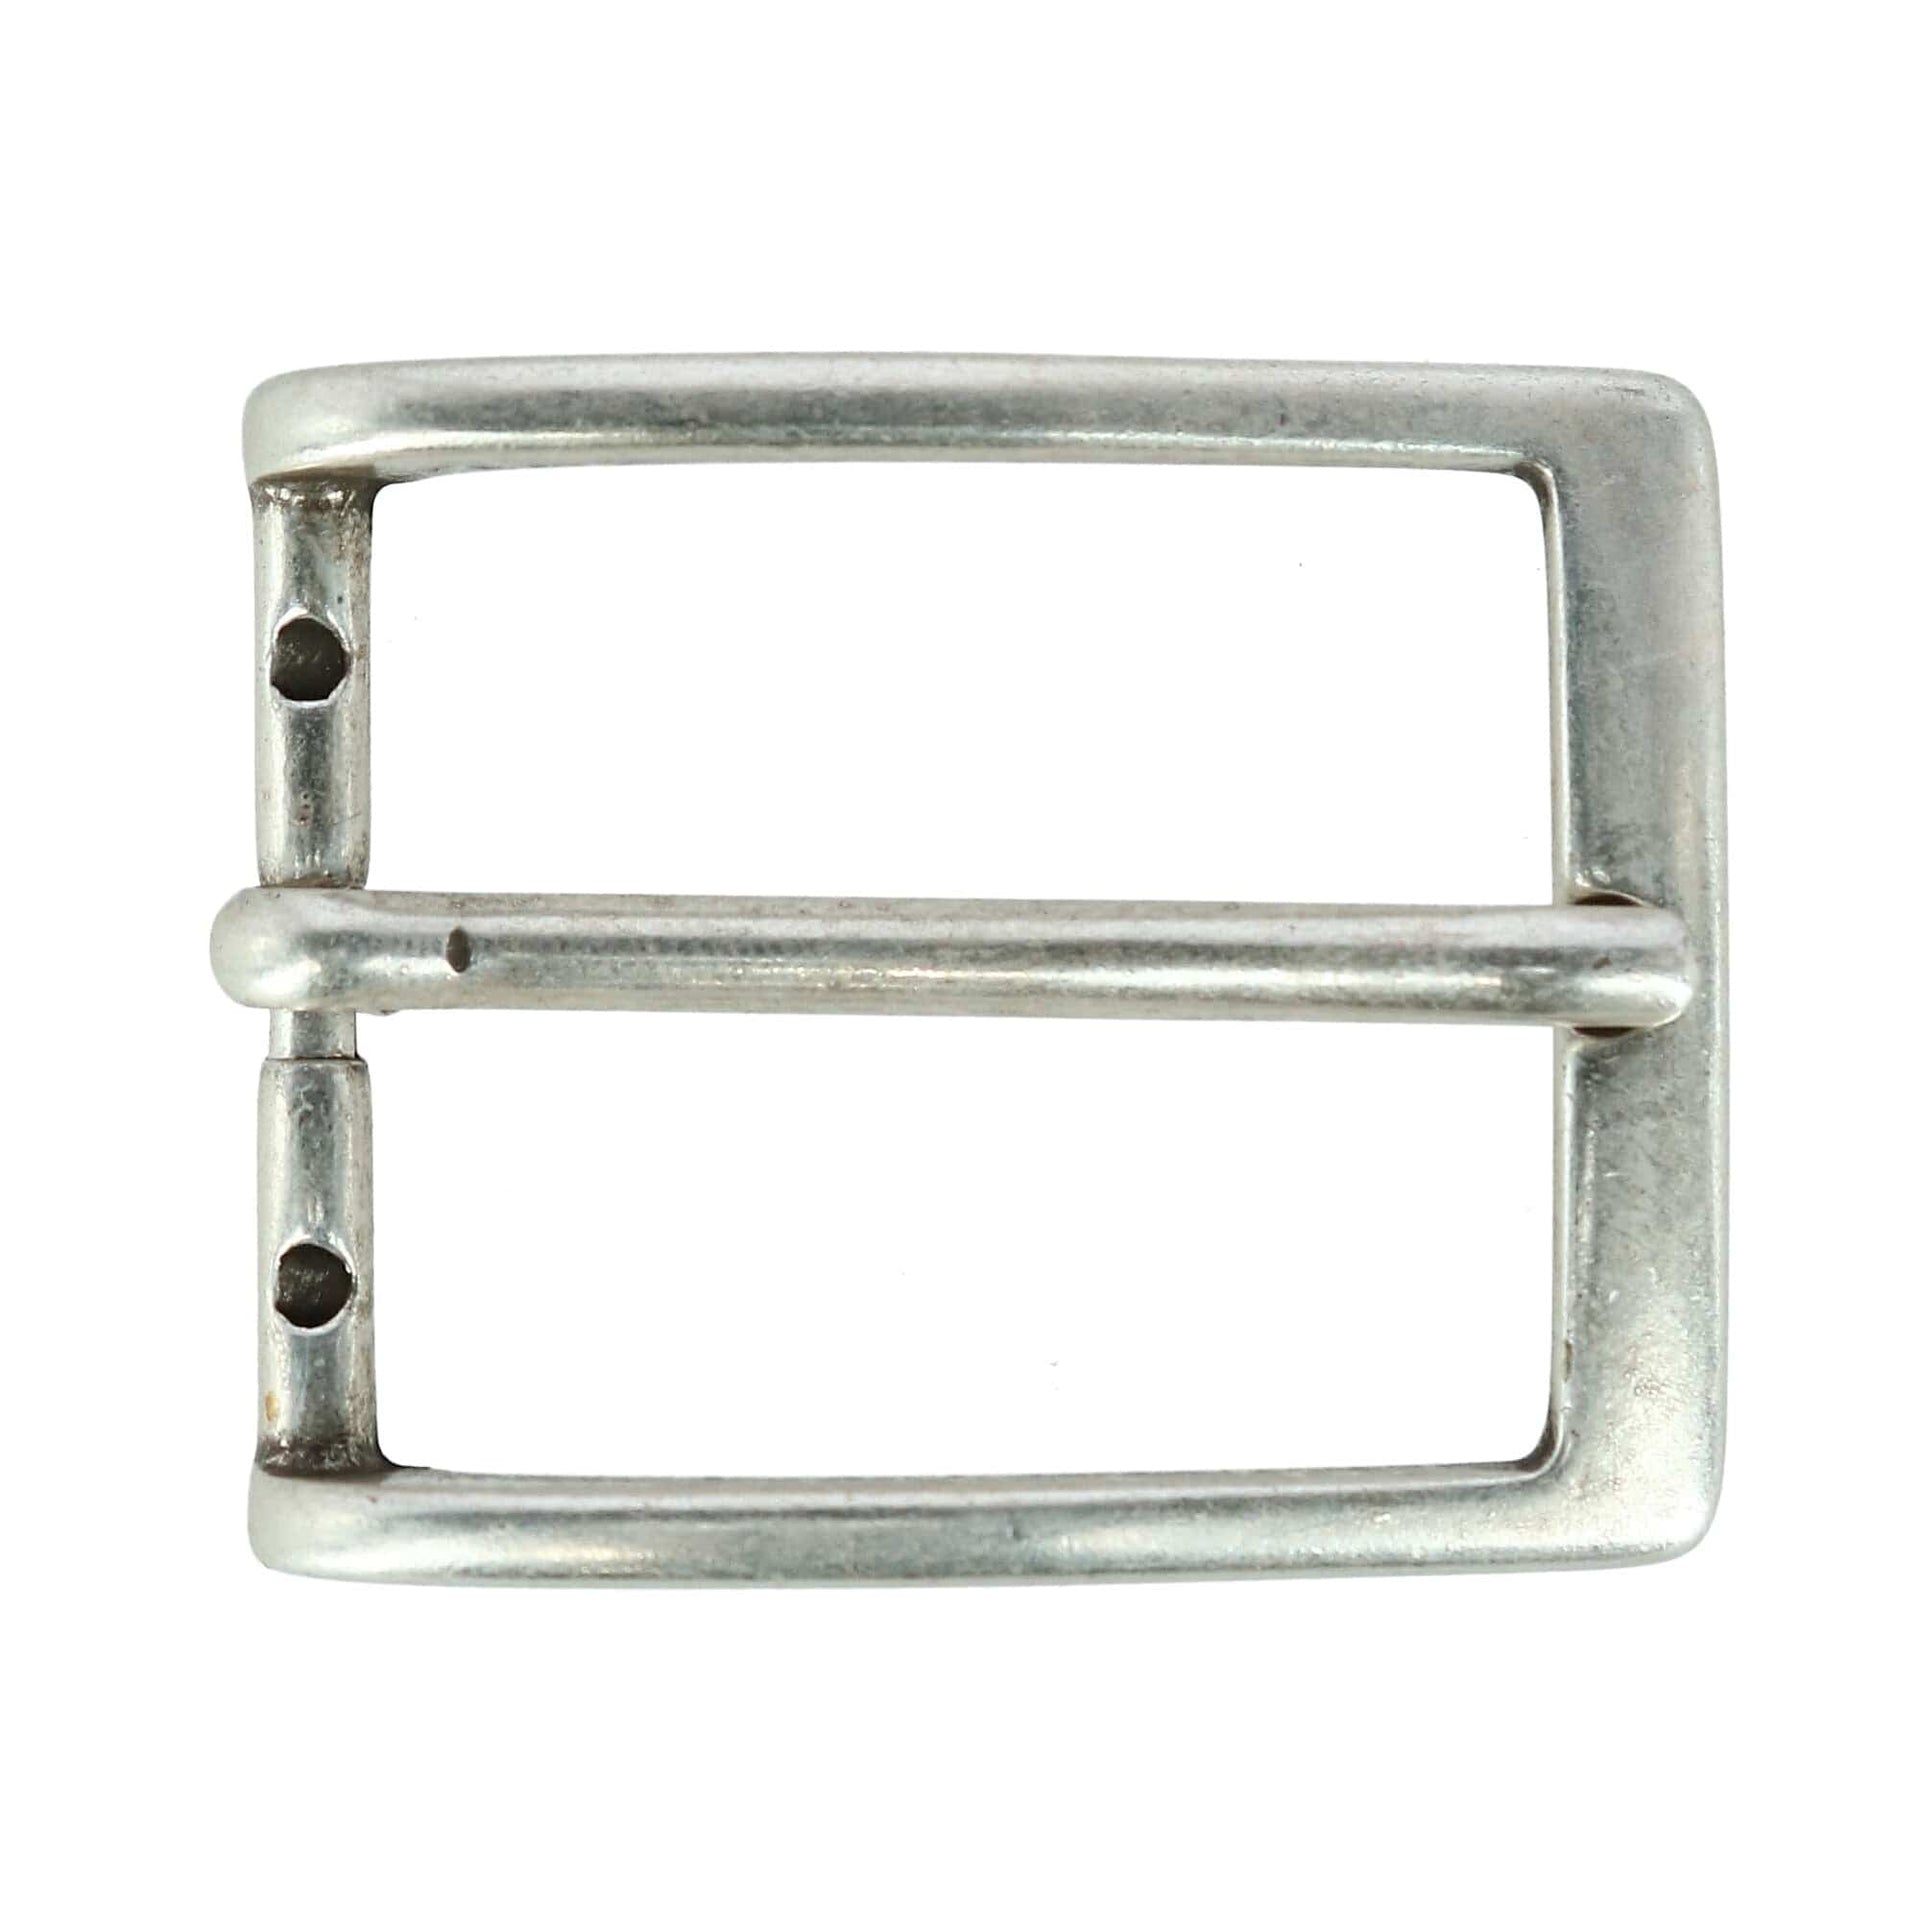 32mm Simply Stated Single Pronged Solid Brass Harness Belt Buckle